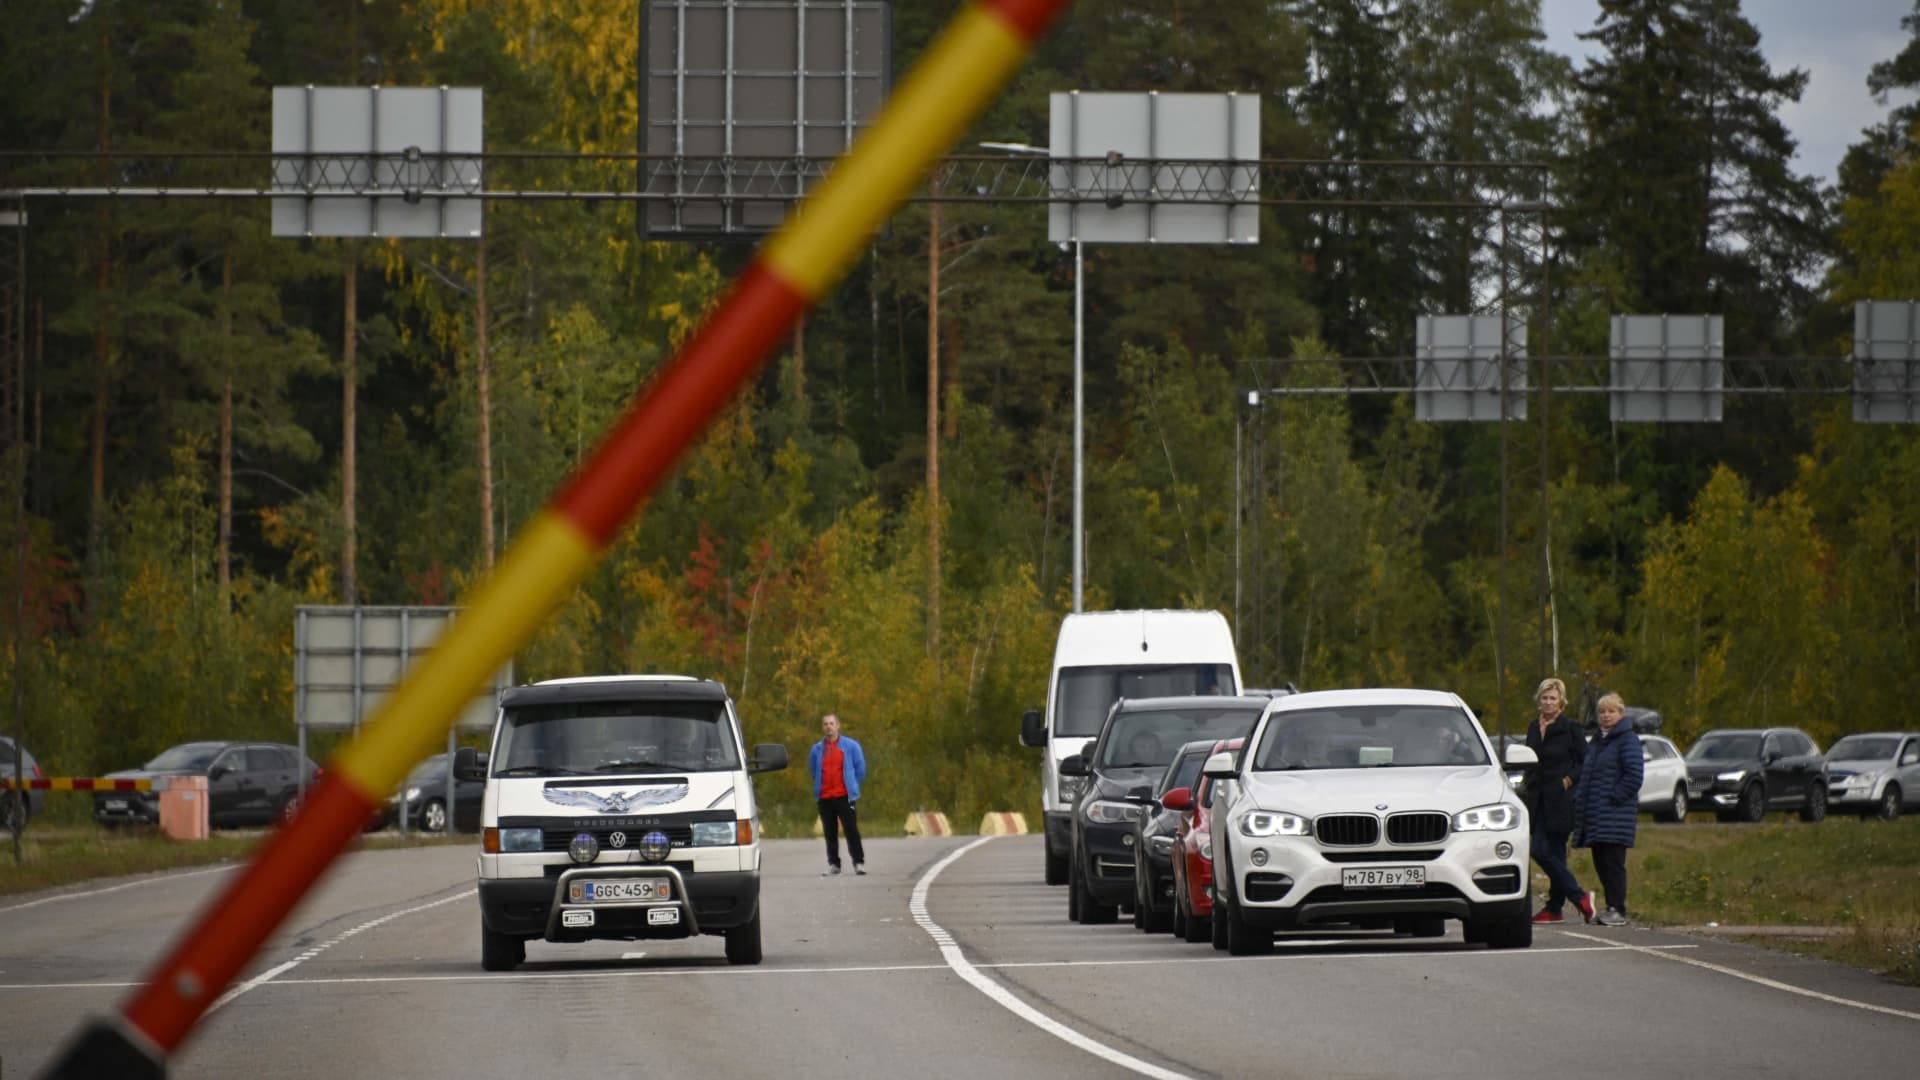 Cars coming from Russia wait in lines at the border checkpoint between Russia and Finland near Vaalimaa, on September 22, 2022.